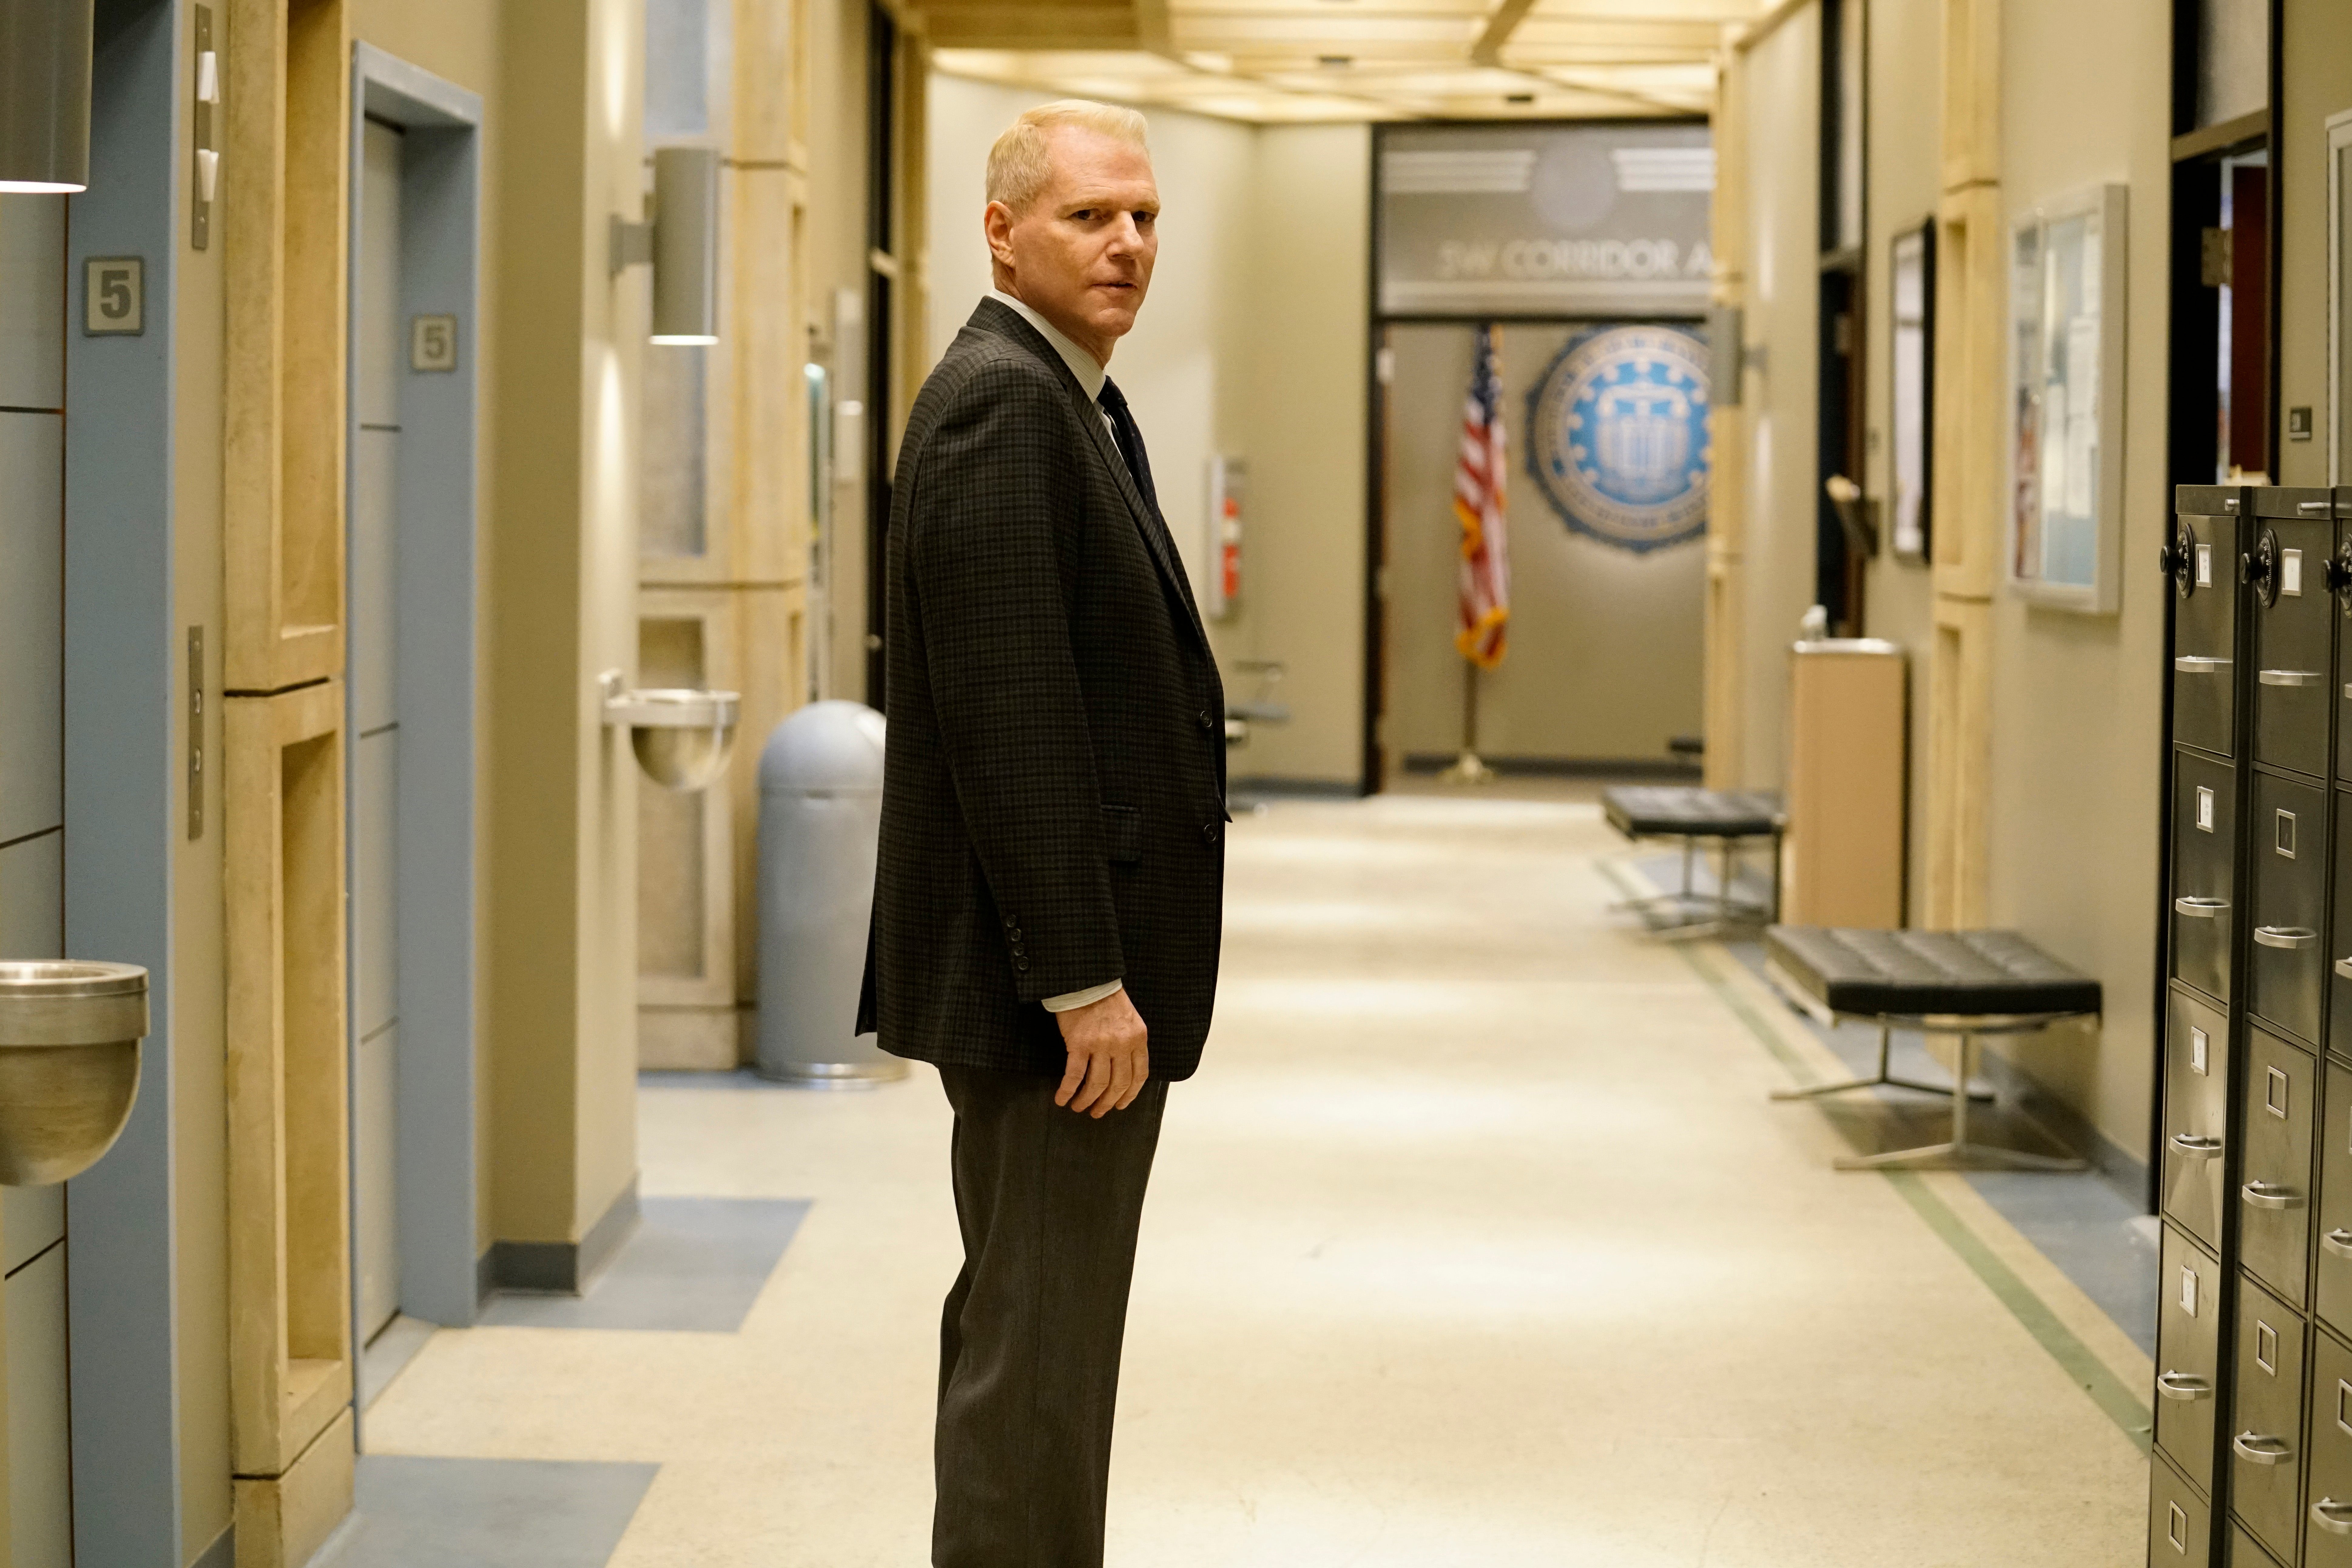 Noah Emmerich as Stan Beeman on The Americans. Emmerich is a white man in fifties with thinning blonde hair and a medium build. He wears brown trousers and a black jacket. The shot shows him from the calves up, in profile. He stands in a hallway.